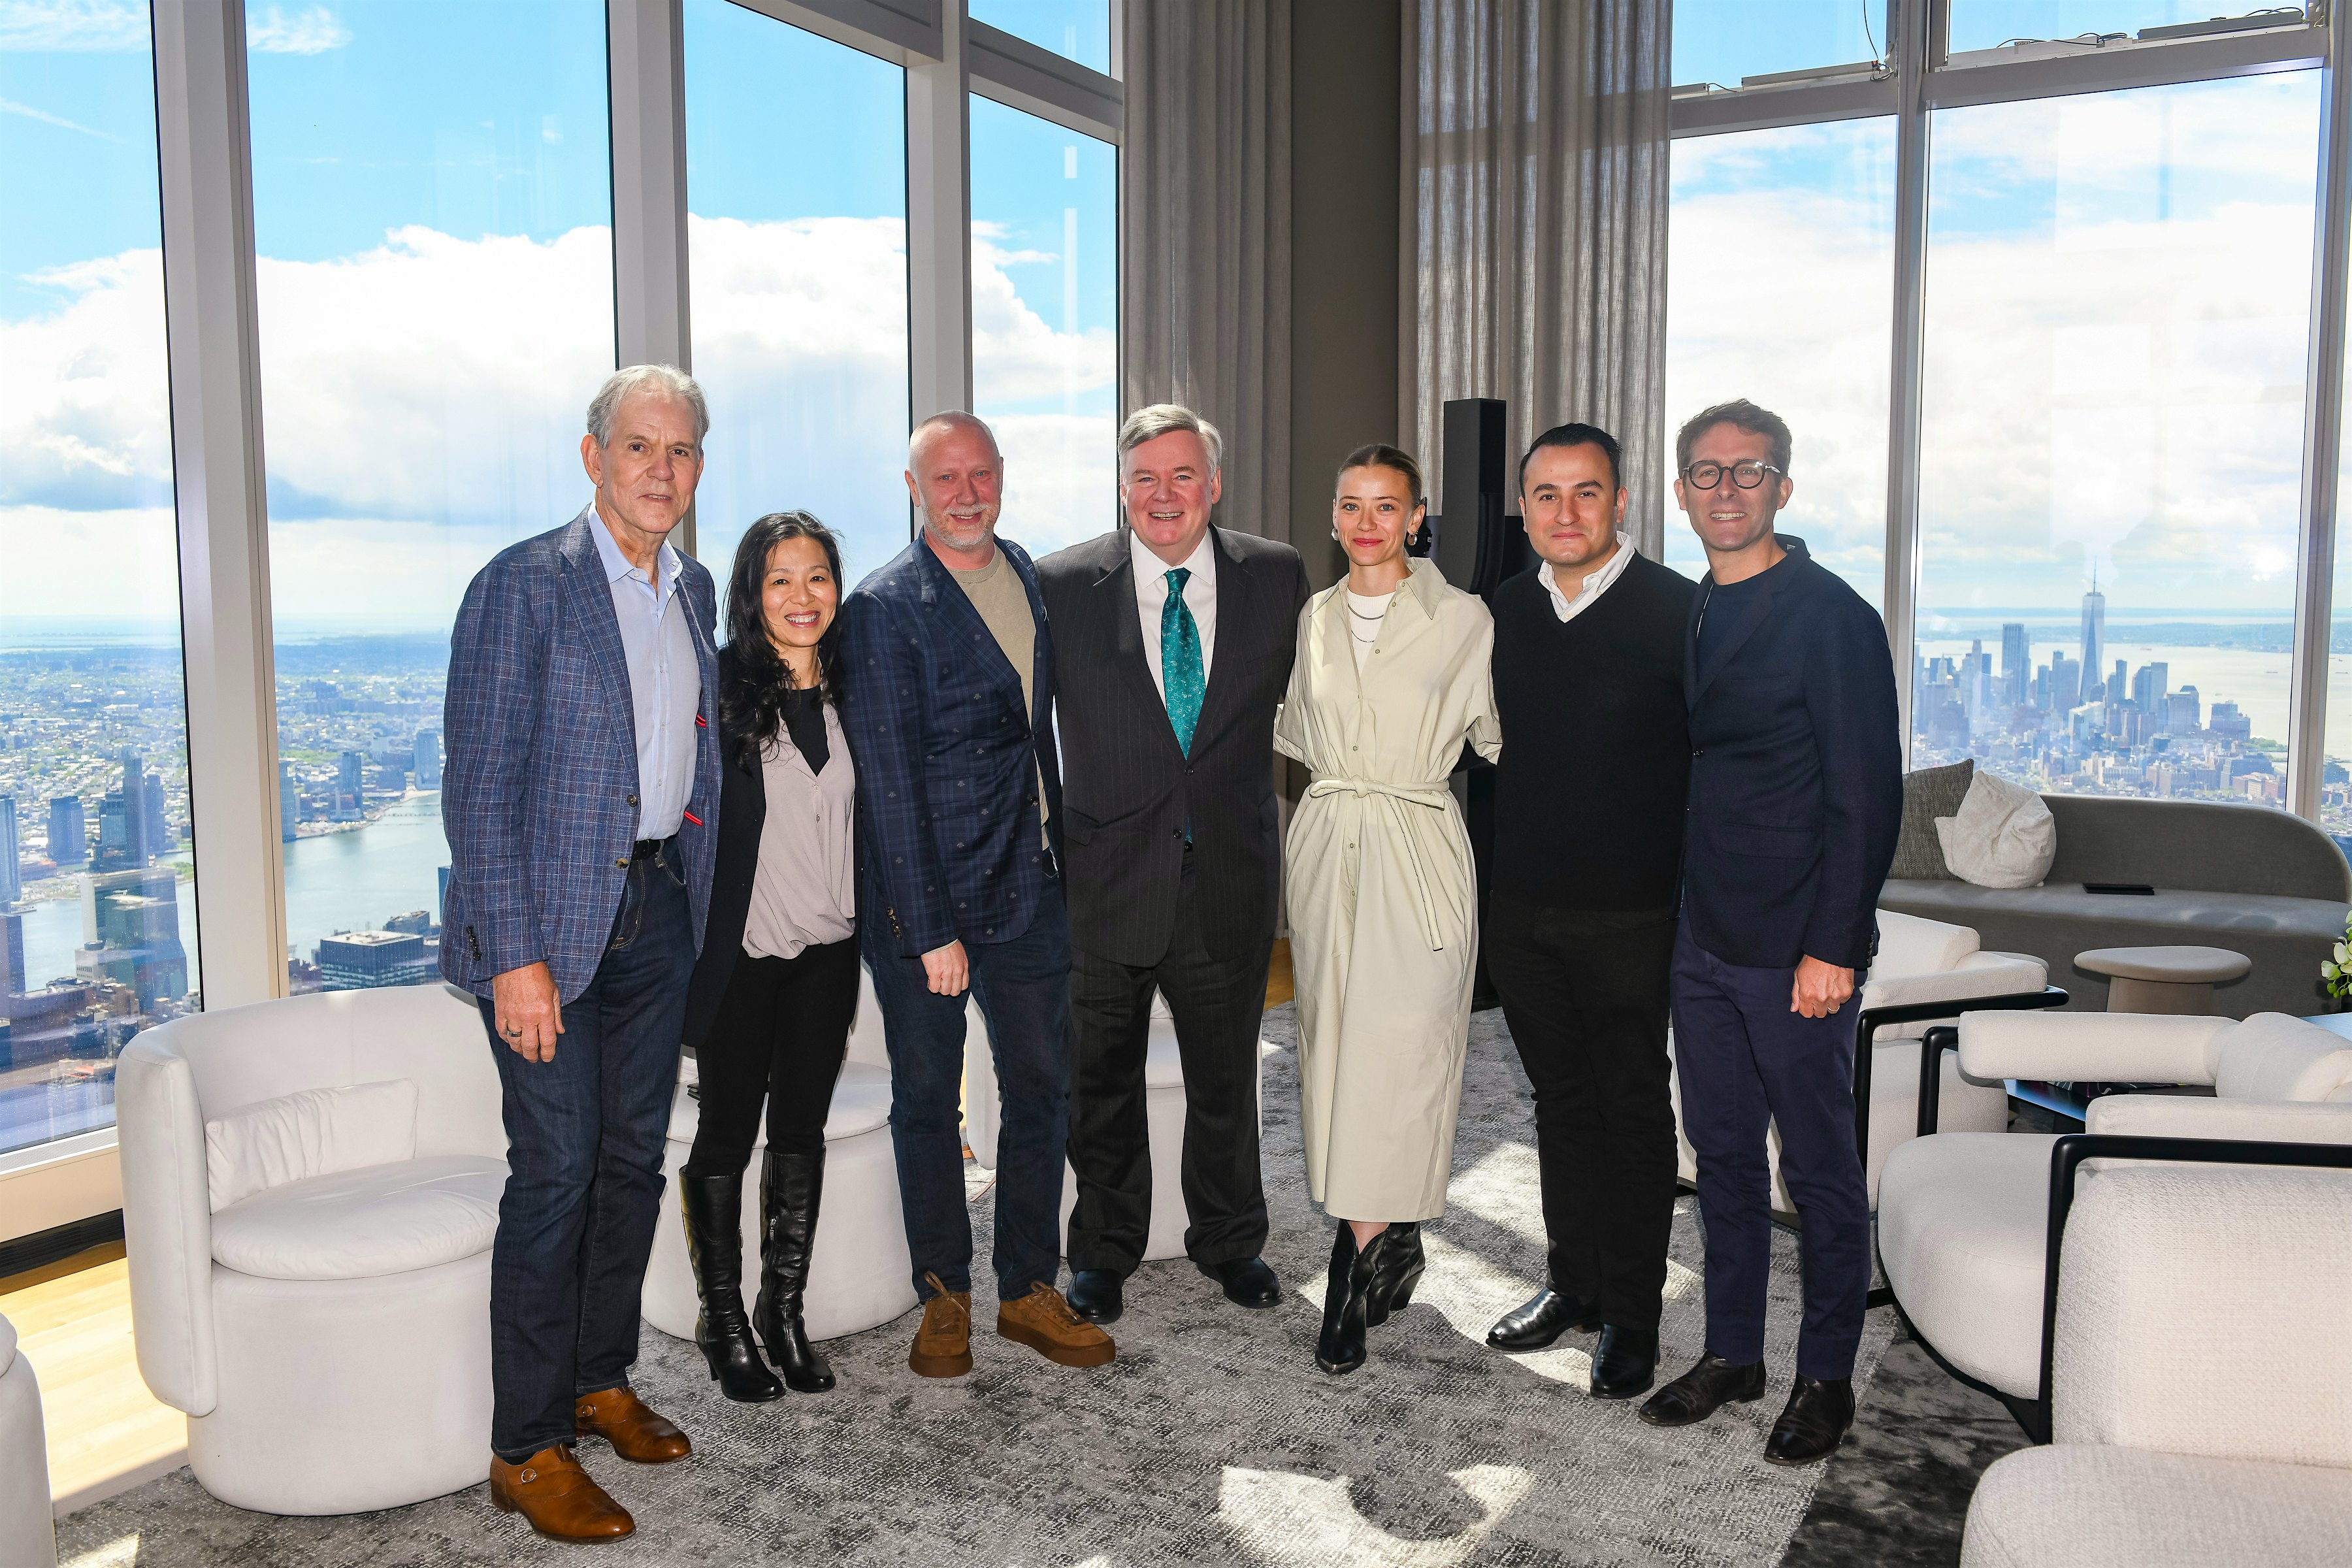  From left to right: Thomas Keller, Niki Nakayama, Kyle Connaughton, Tim Ryan, Daisy Ryan, Val Cantú and Vincent Chaperon at the announcement of Dom Pérignon's scholarship for masters students at the Culinary Institute of America